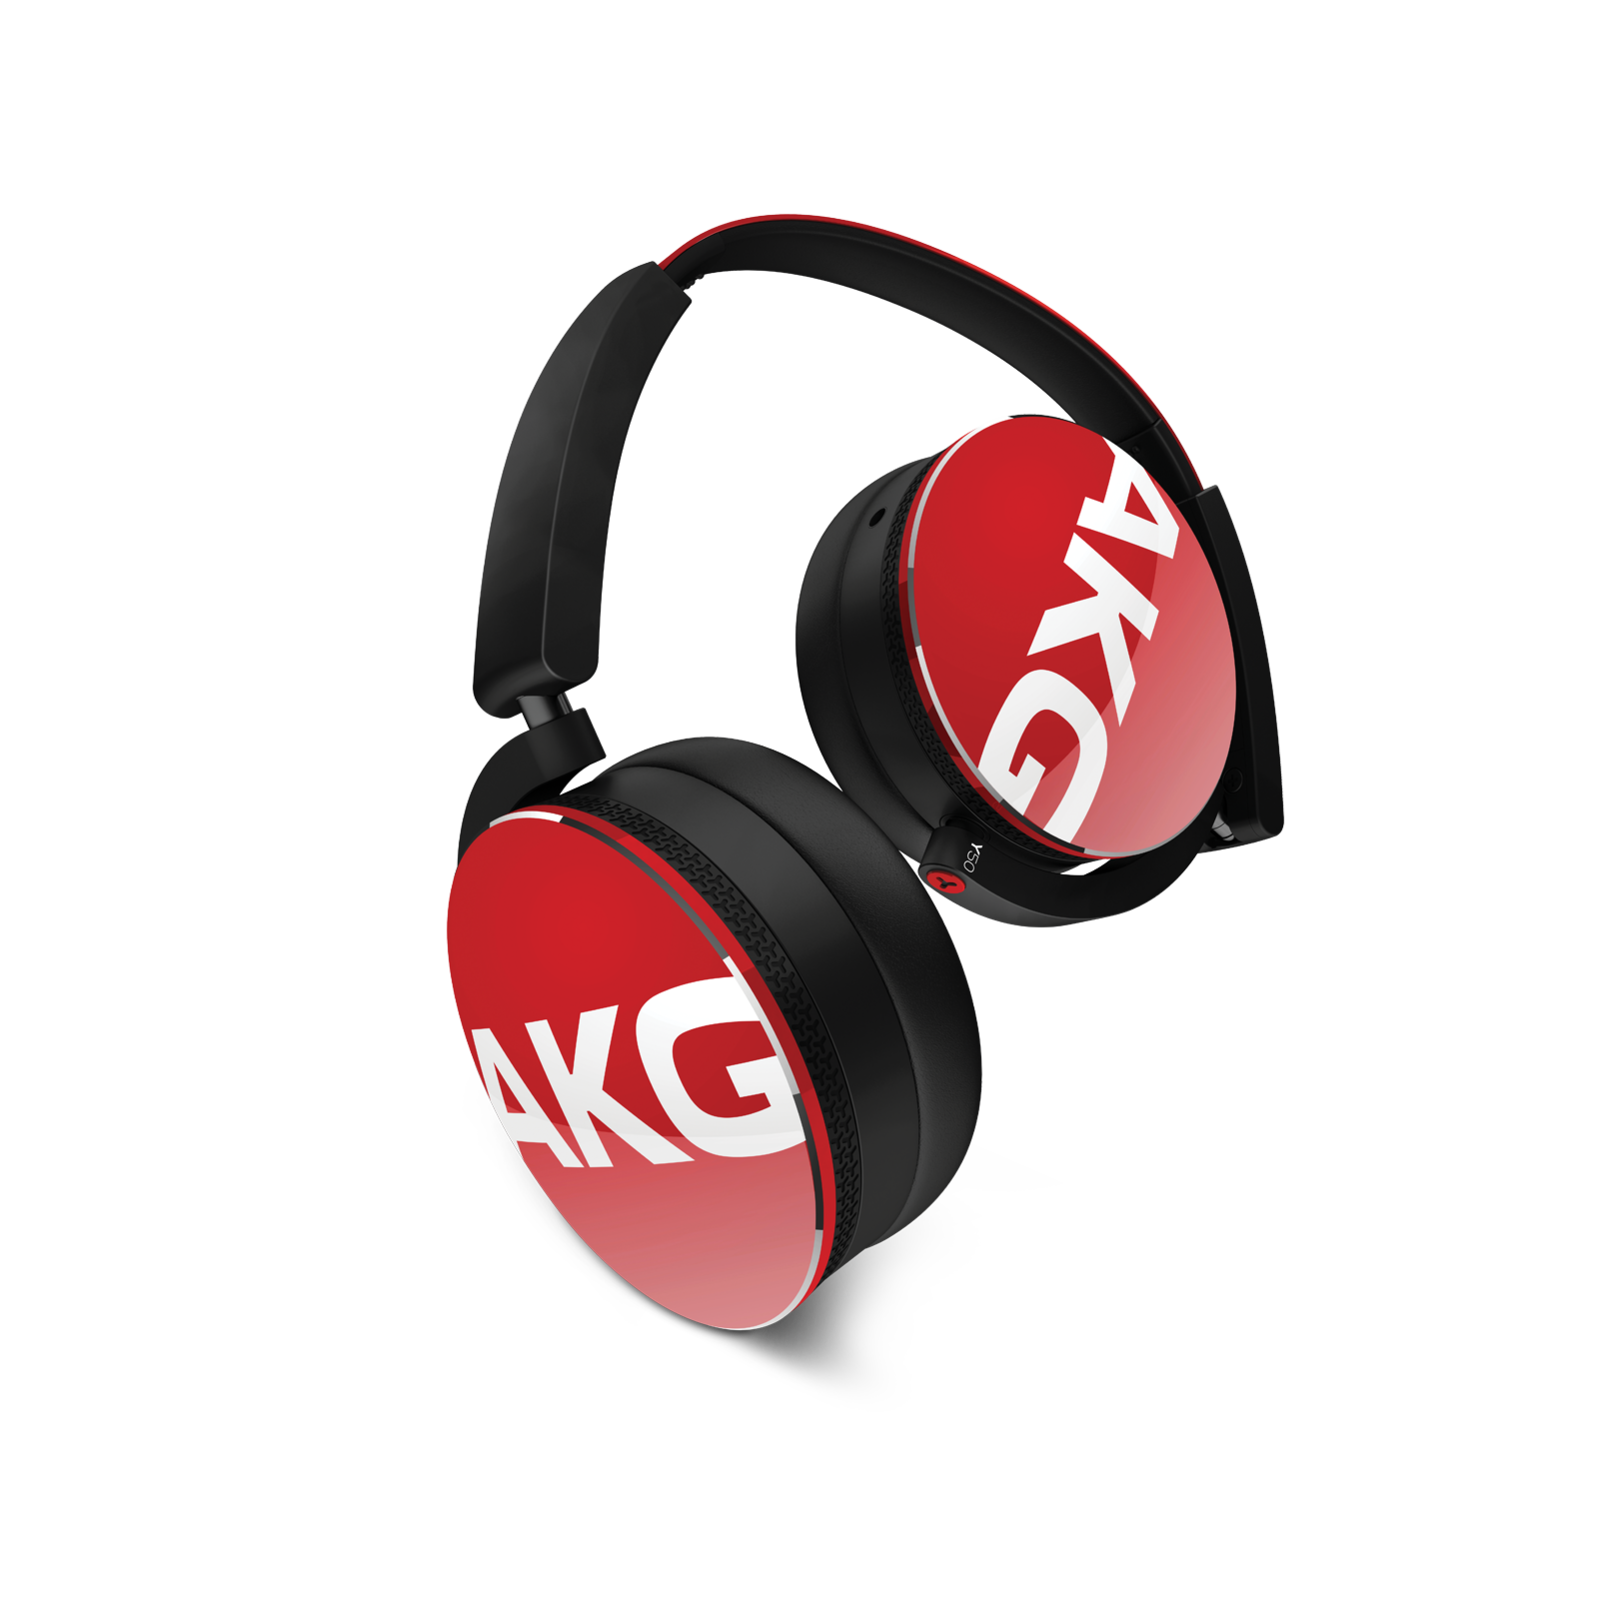 Y50 - Red - On-ear headphones with leyu-quality sound, smart styling, snug fit and detachable cable with in-line remote/mic - Hero